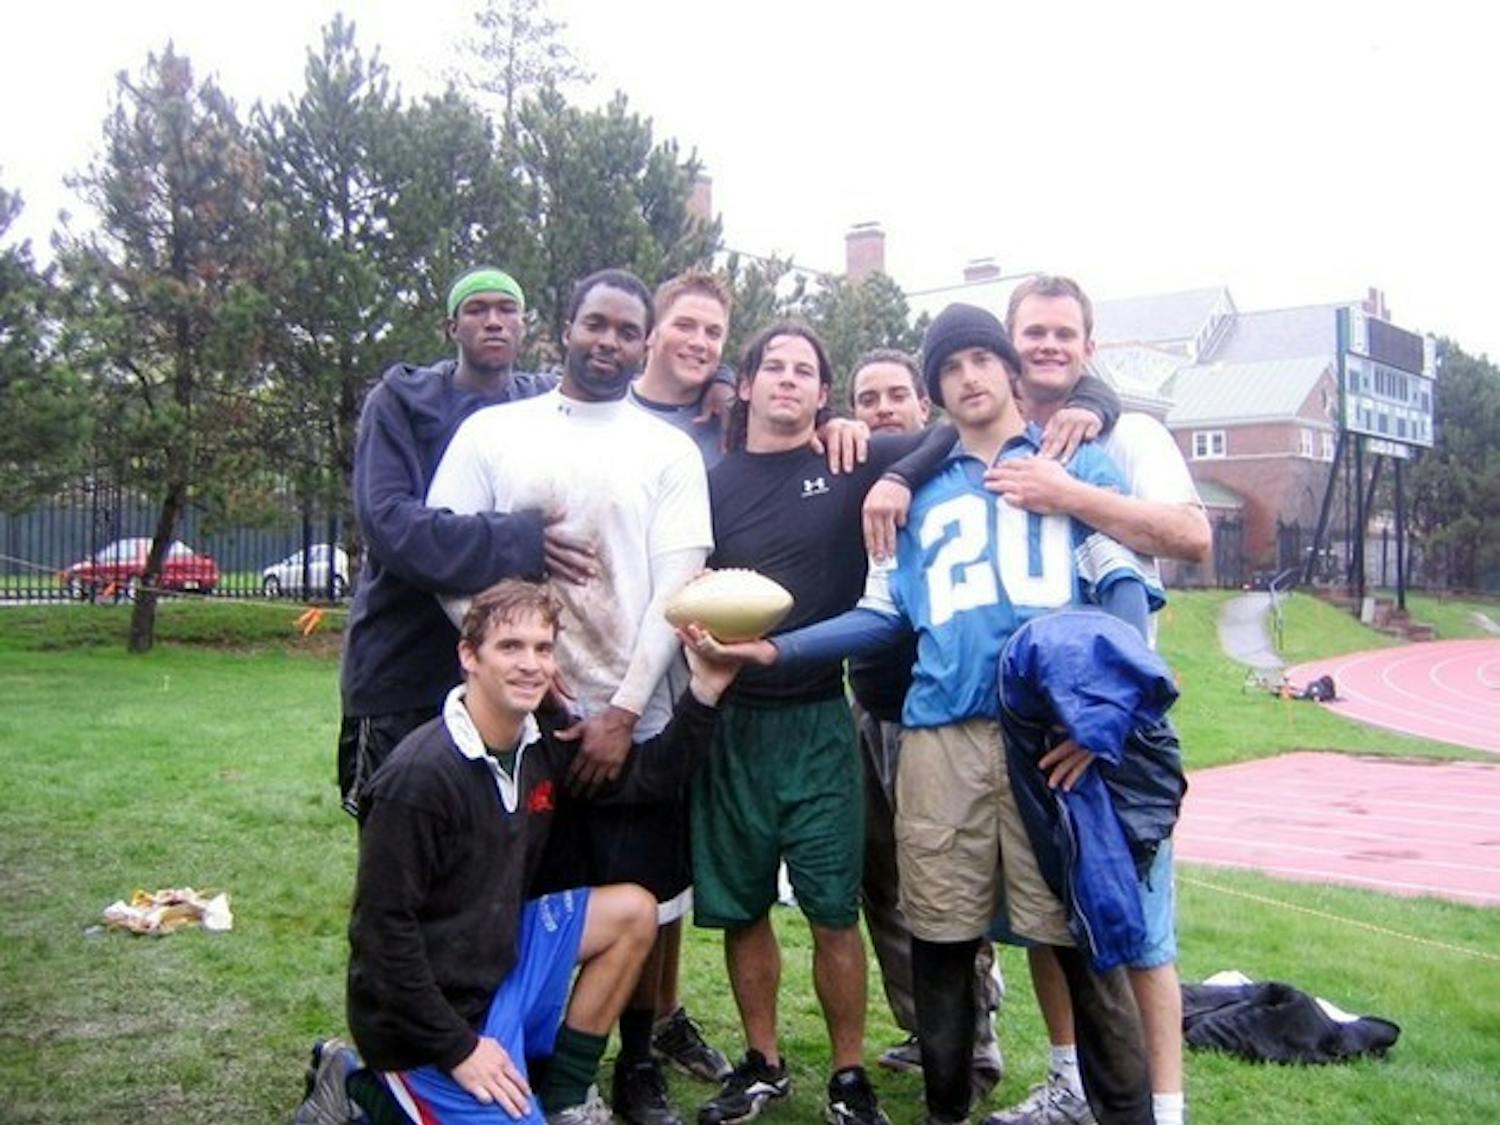 The Turdsquashers display the golden football in the rain after rolling over Chi Gam 13-0 in the fraternity league championship game.